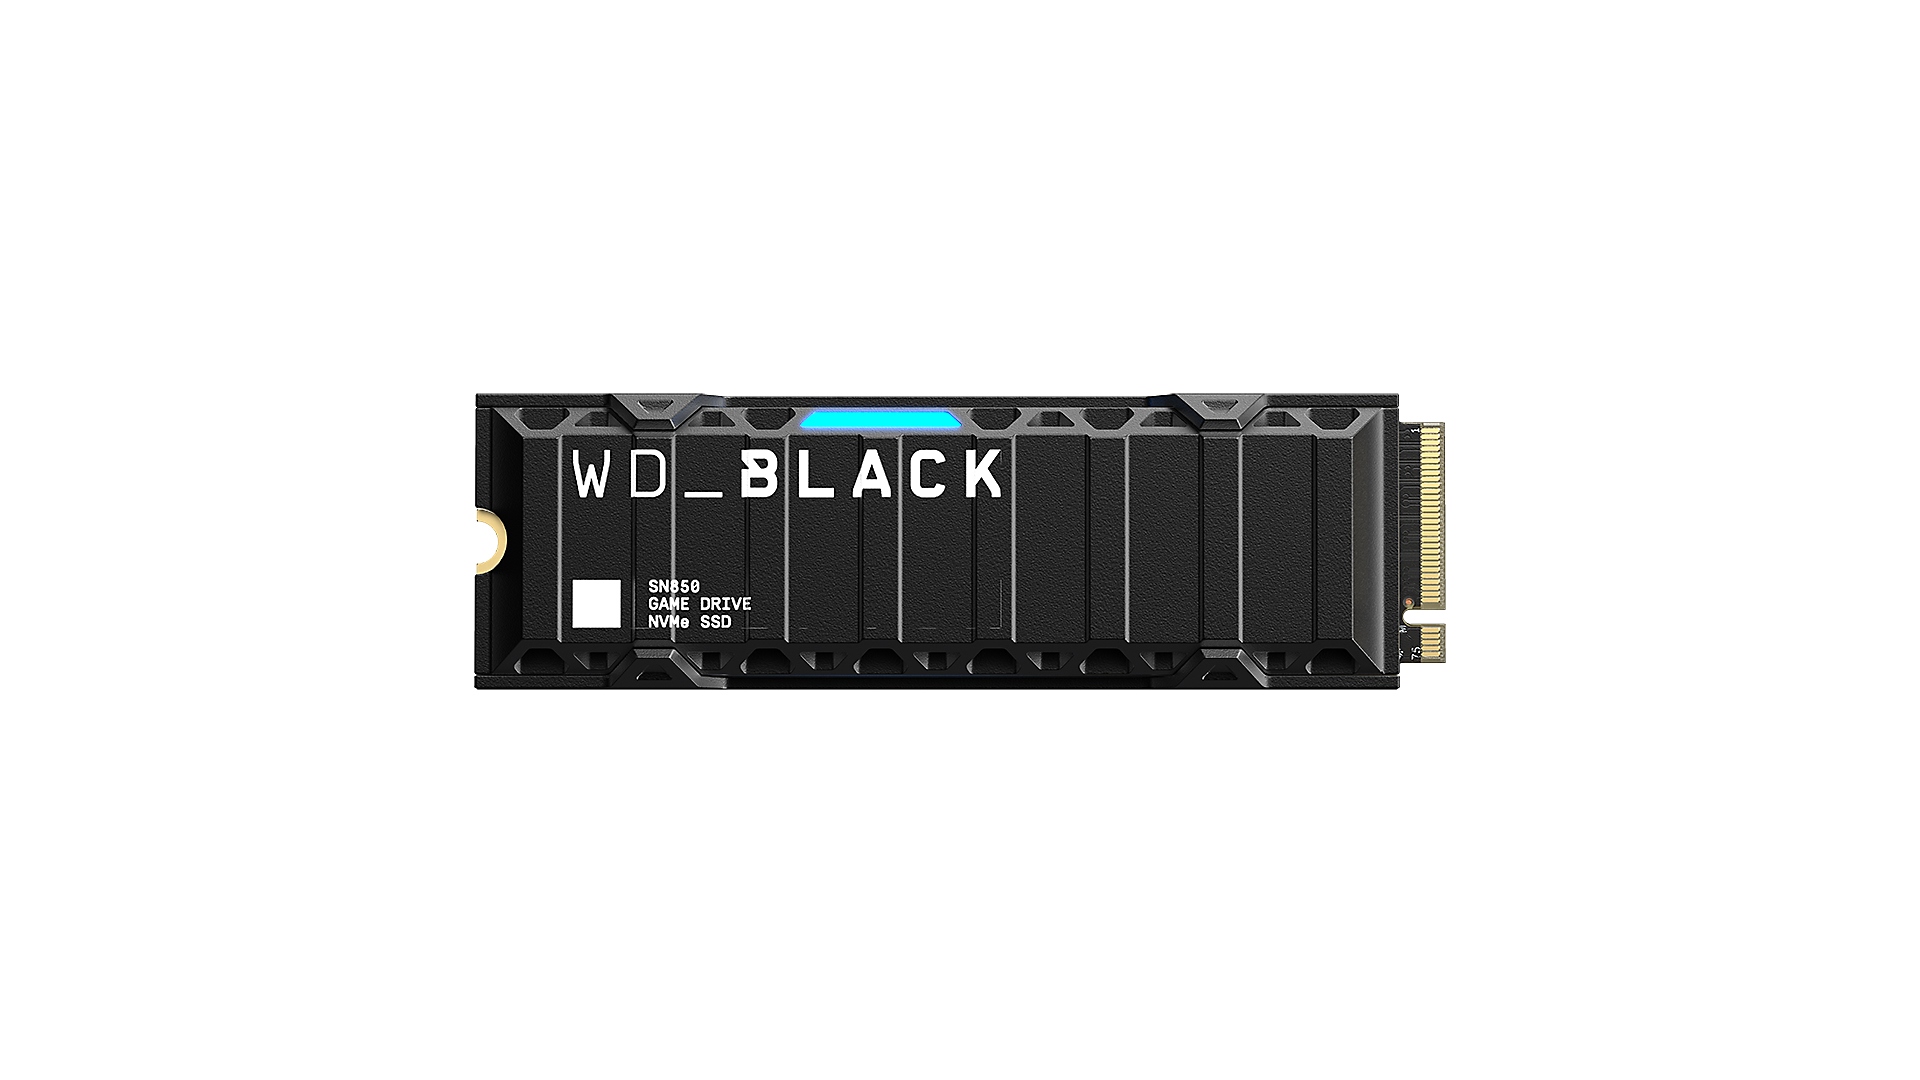 WD_BLACK SN850 NVMe SSD for PS5 Consoles Gallery Image 1